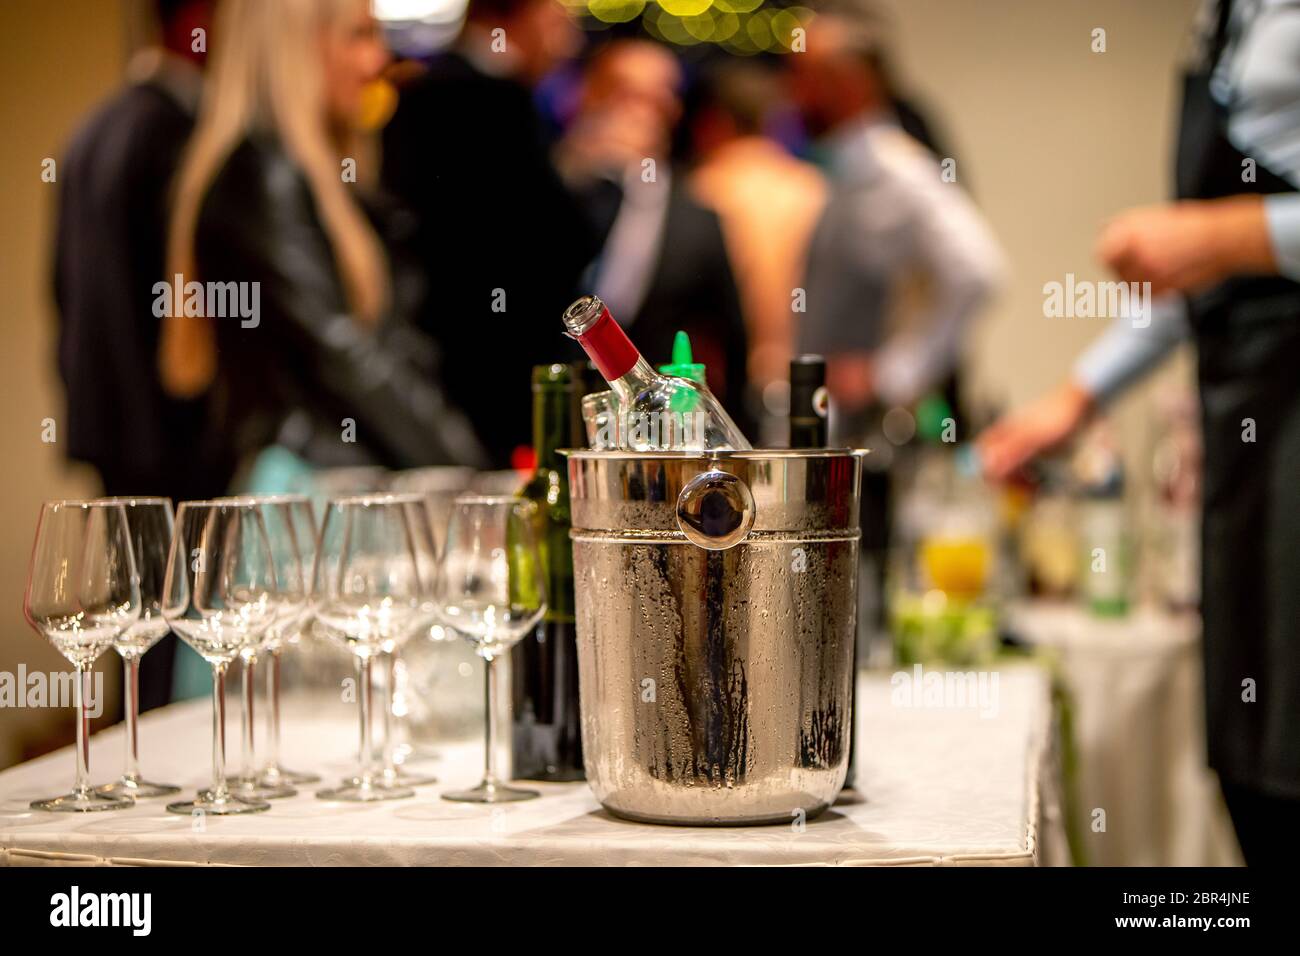 Bucket with ice, wine bottles and empty glasses on table in restaurant. Ice bucket, wine glasses and bottles arranged on the table for wedding recepti Stock Photo